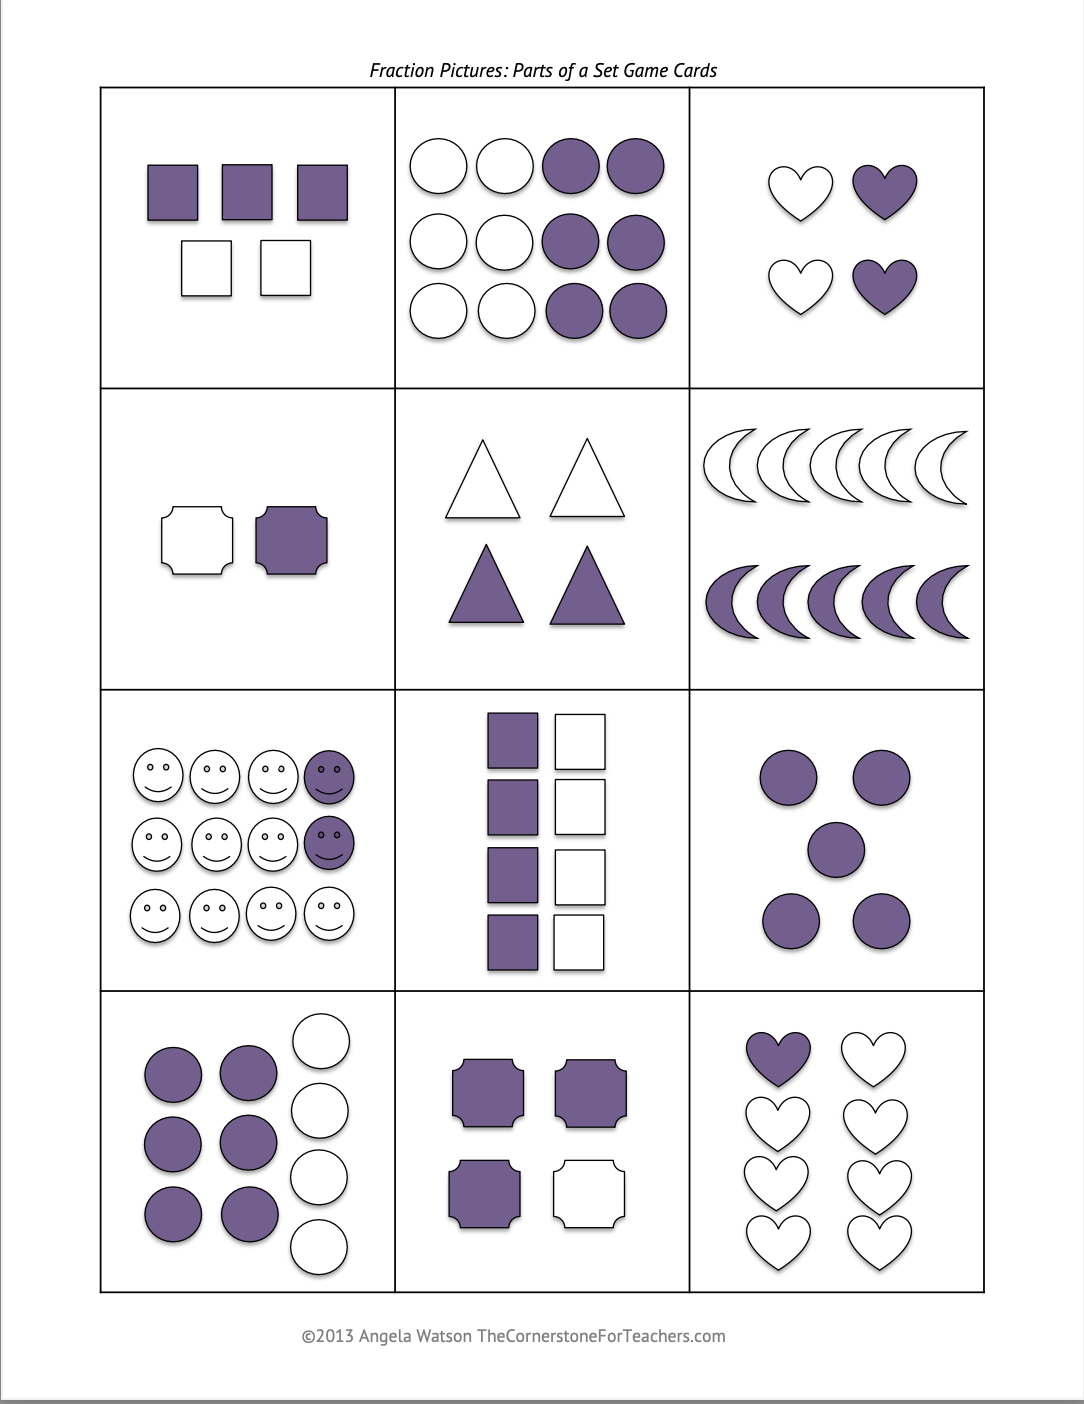 FREE Fraction Cards for sorting, matching, & other hands-on activities